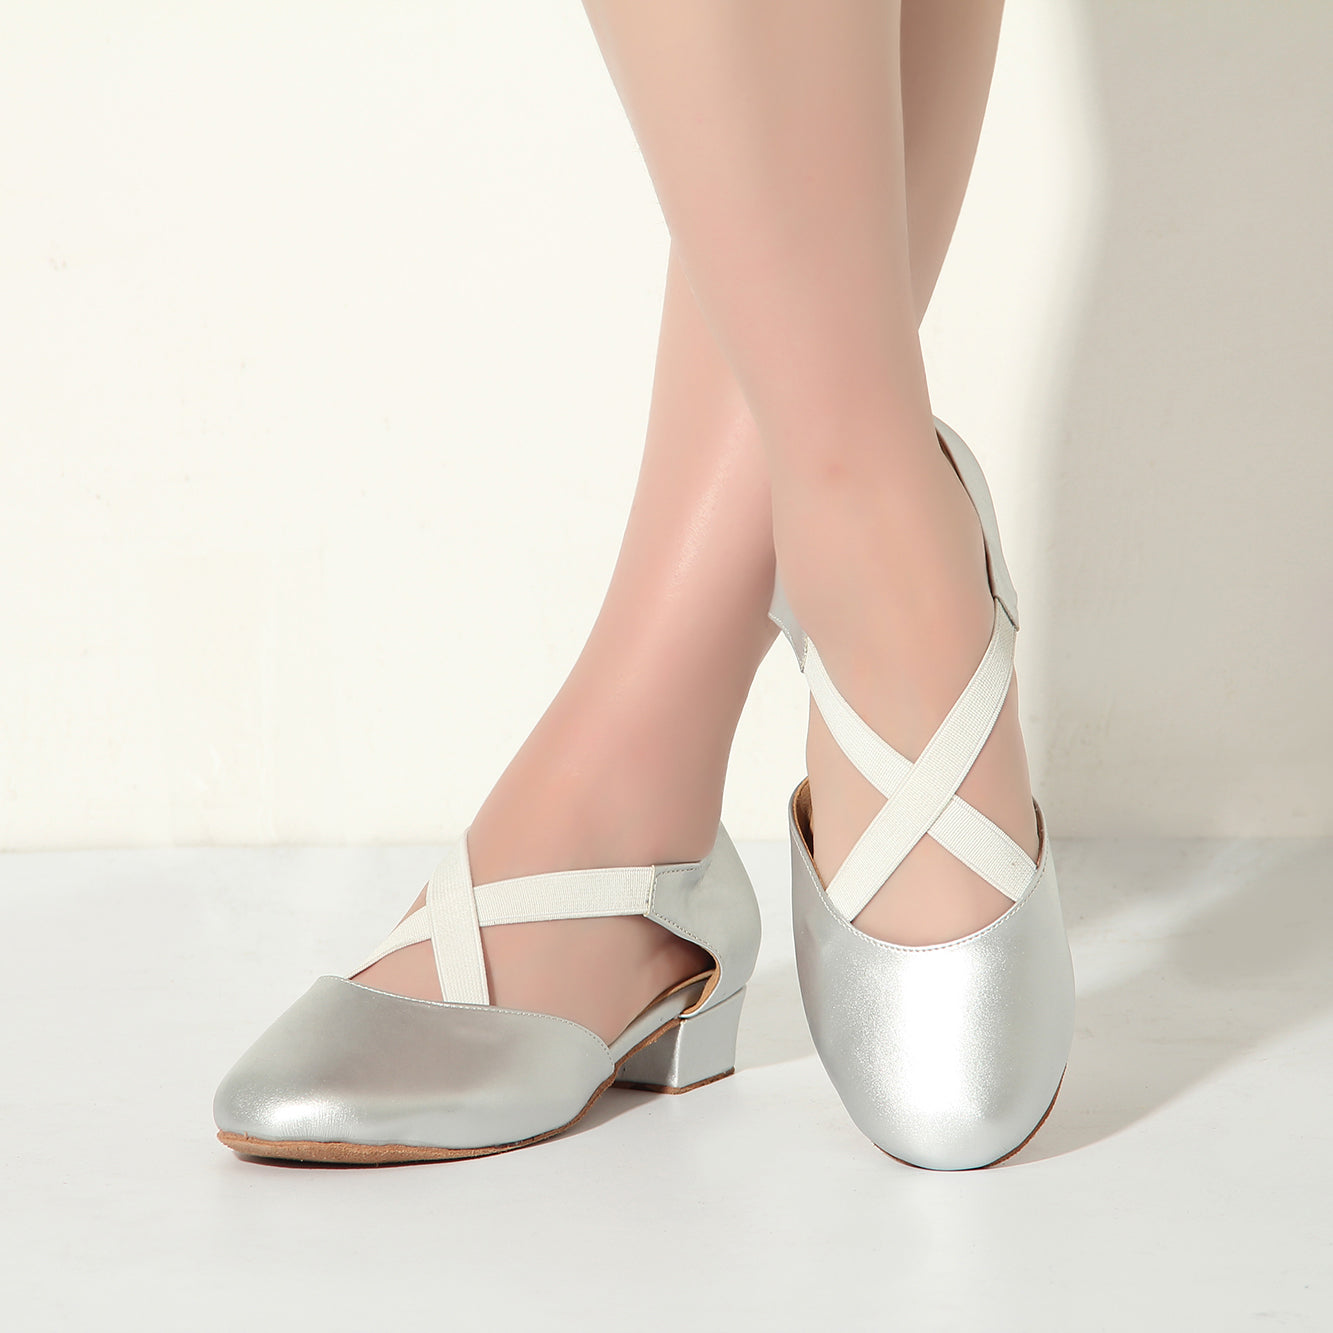 Women Ballroom Dancing Shoes with Suede Sole, Closed-toe Silver Tango Latin Practice Dance Shoe for Ladies (PD7307F)9